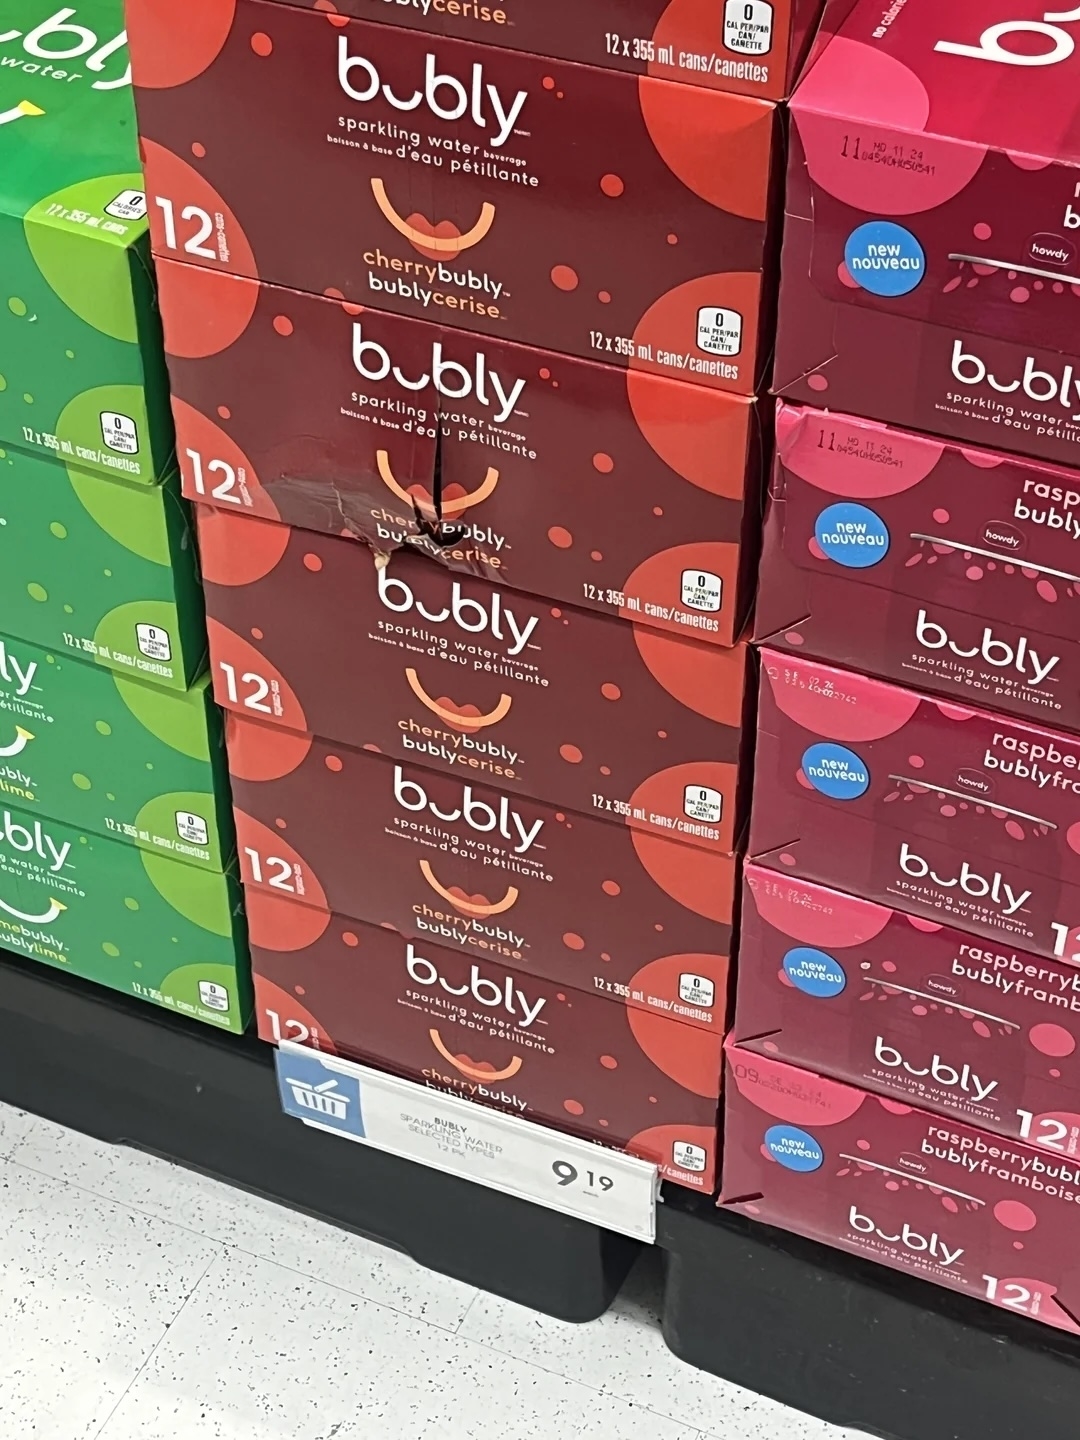 Shelves stocked with various flavors of Bubly sparkling water in a store